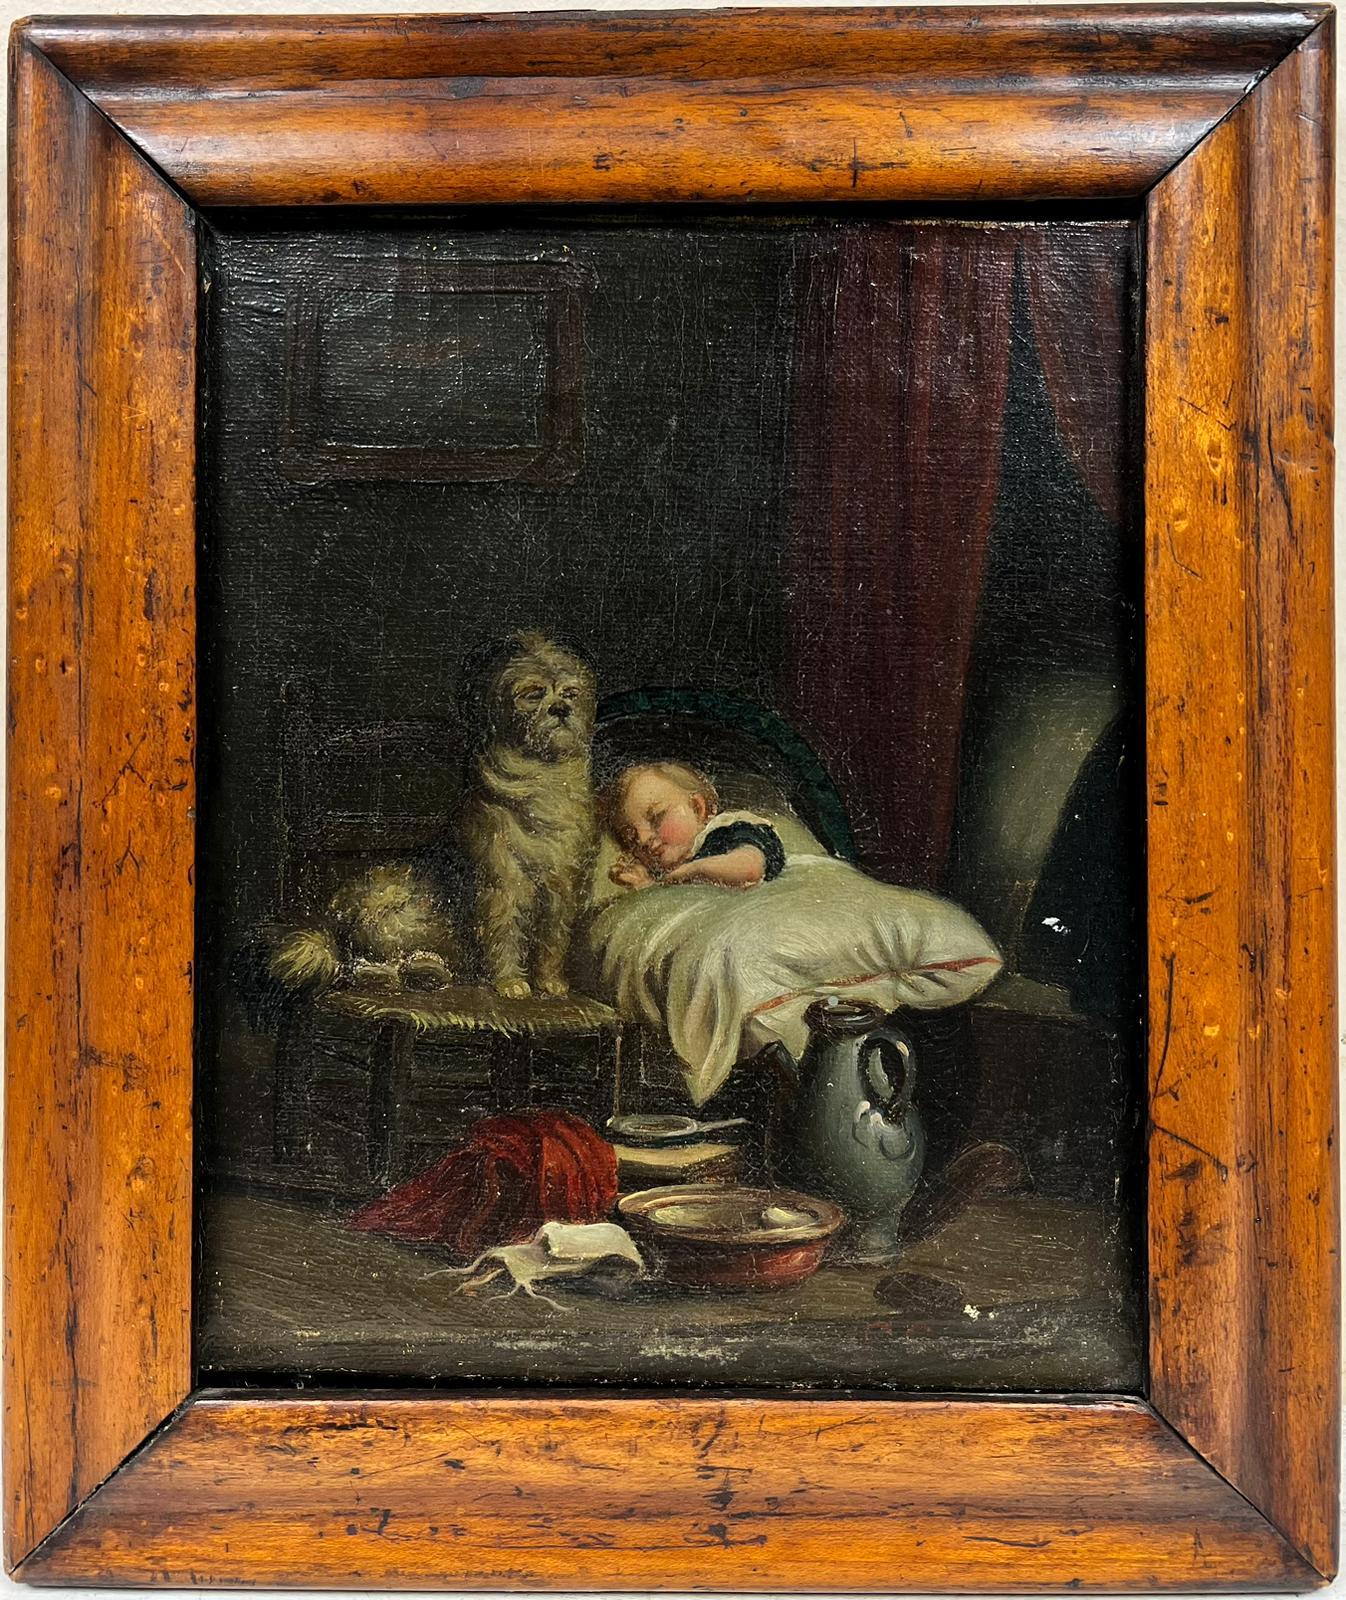 19th Century English School
oil painting on canvas, framed in wooden antique frame
framed: 12 x 9 inches
canvas: 9 x 6.5 inches
provenance: private collection, England 
condition: overall very good